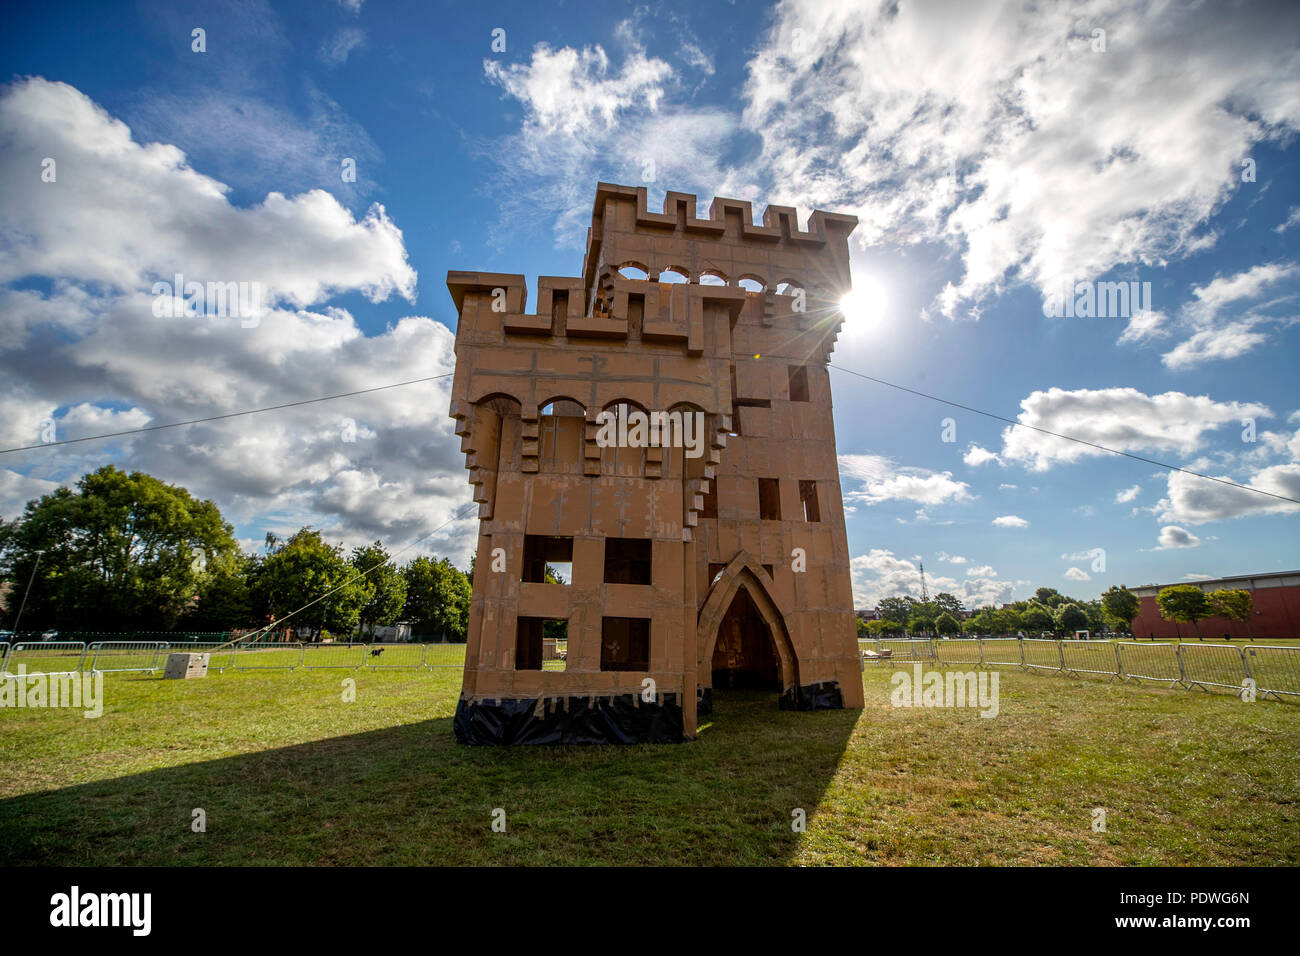 A cardboard recreation of Miller's Castle, which stood in Bootle in the early 19th century, goes on display in North Park, Bootle, Sefton. As part of French artist Olivier Grossetete's Lost Castles art project, six ornate structures have been built around the Liverpool city region using nothing more than cardboard boxes and copious amounts of sticky tape. Stock Photo